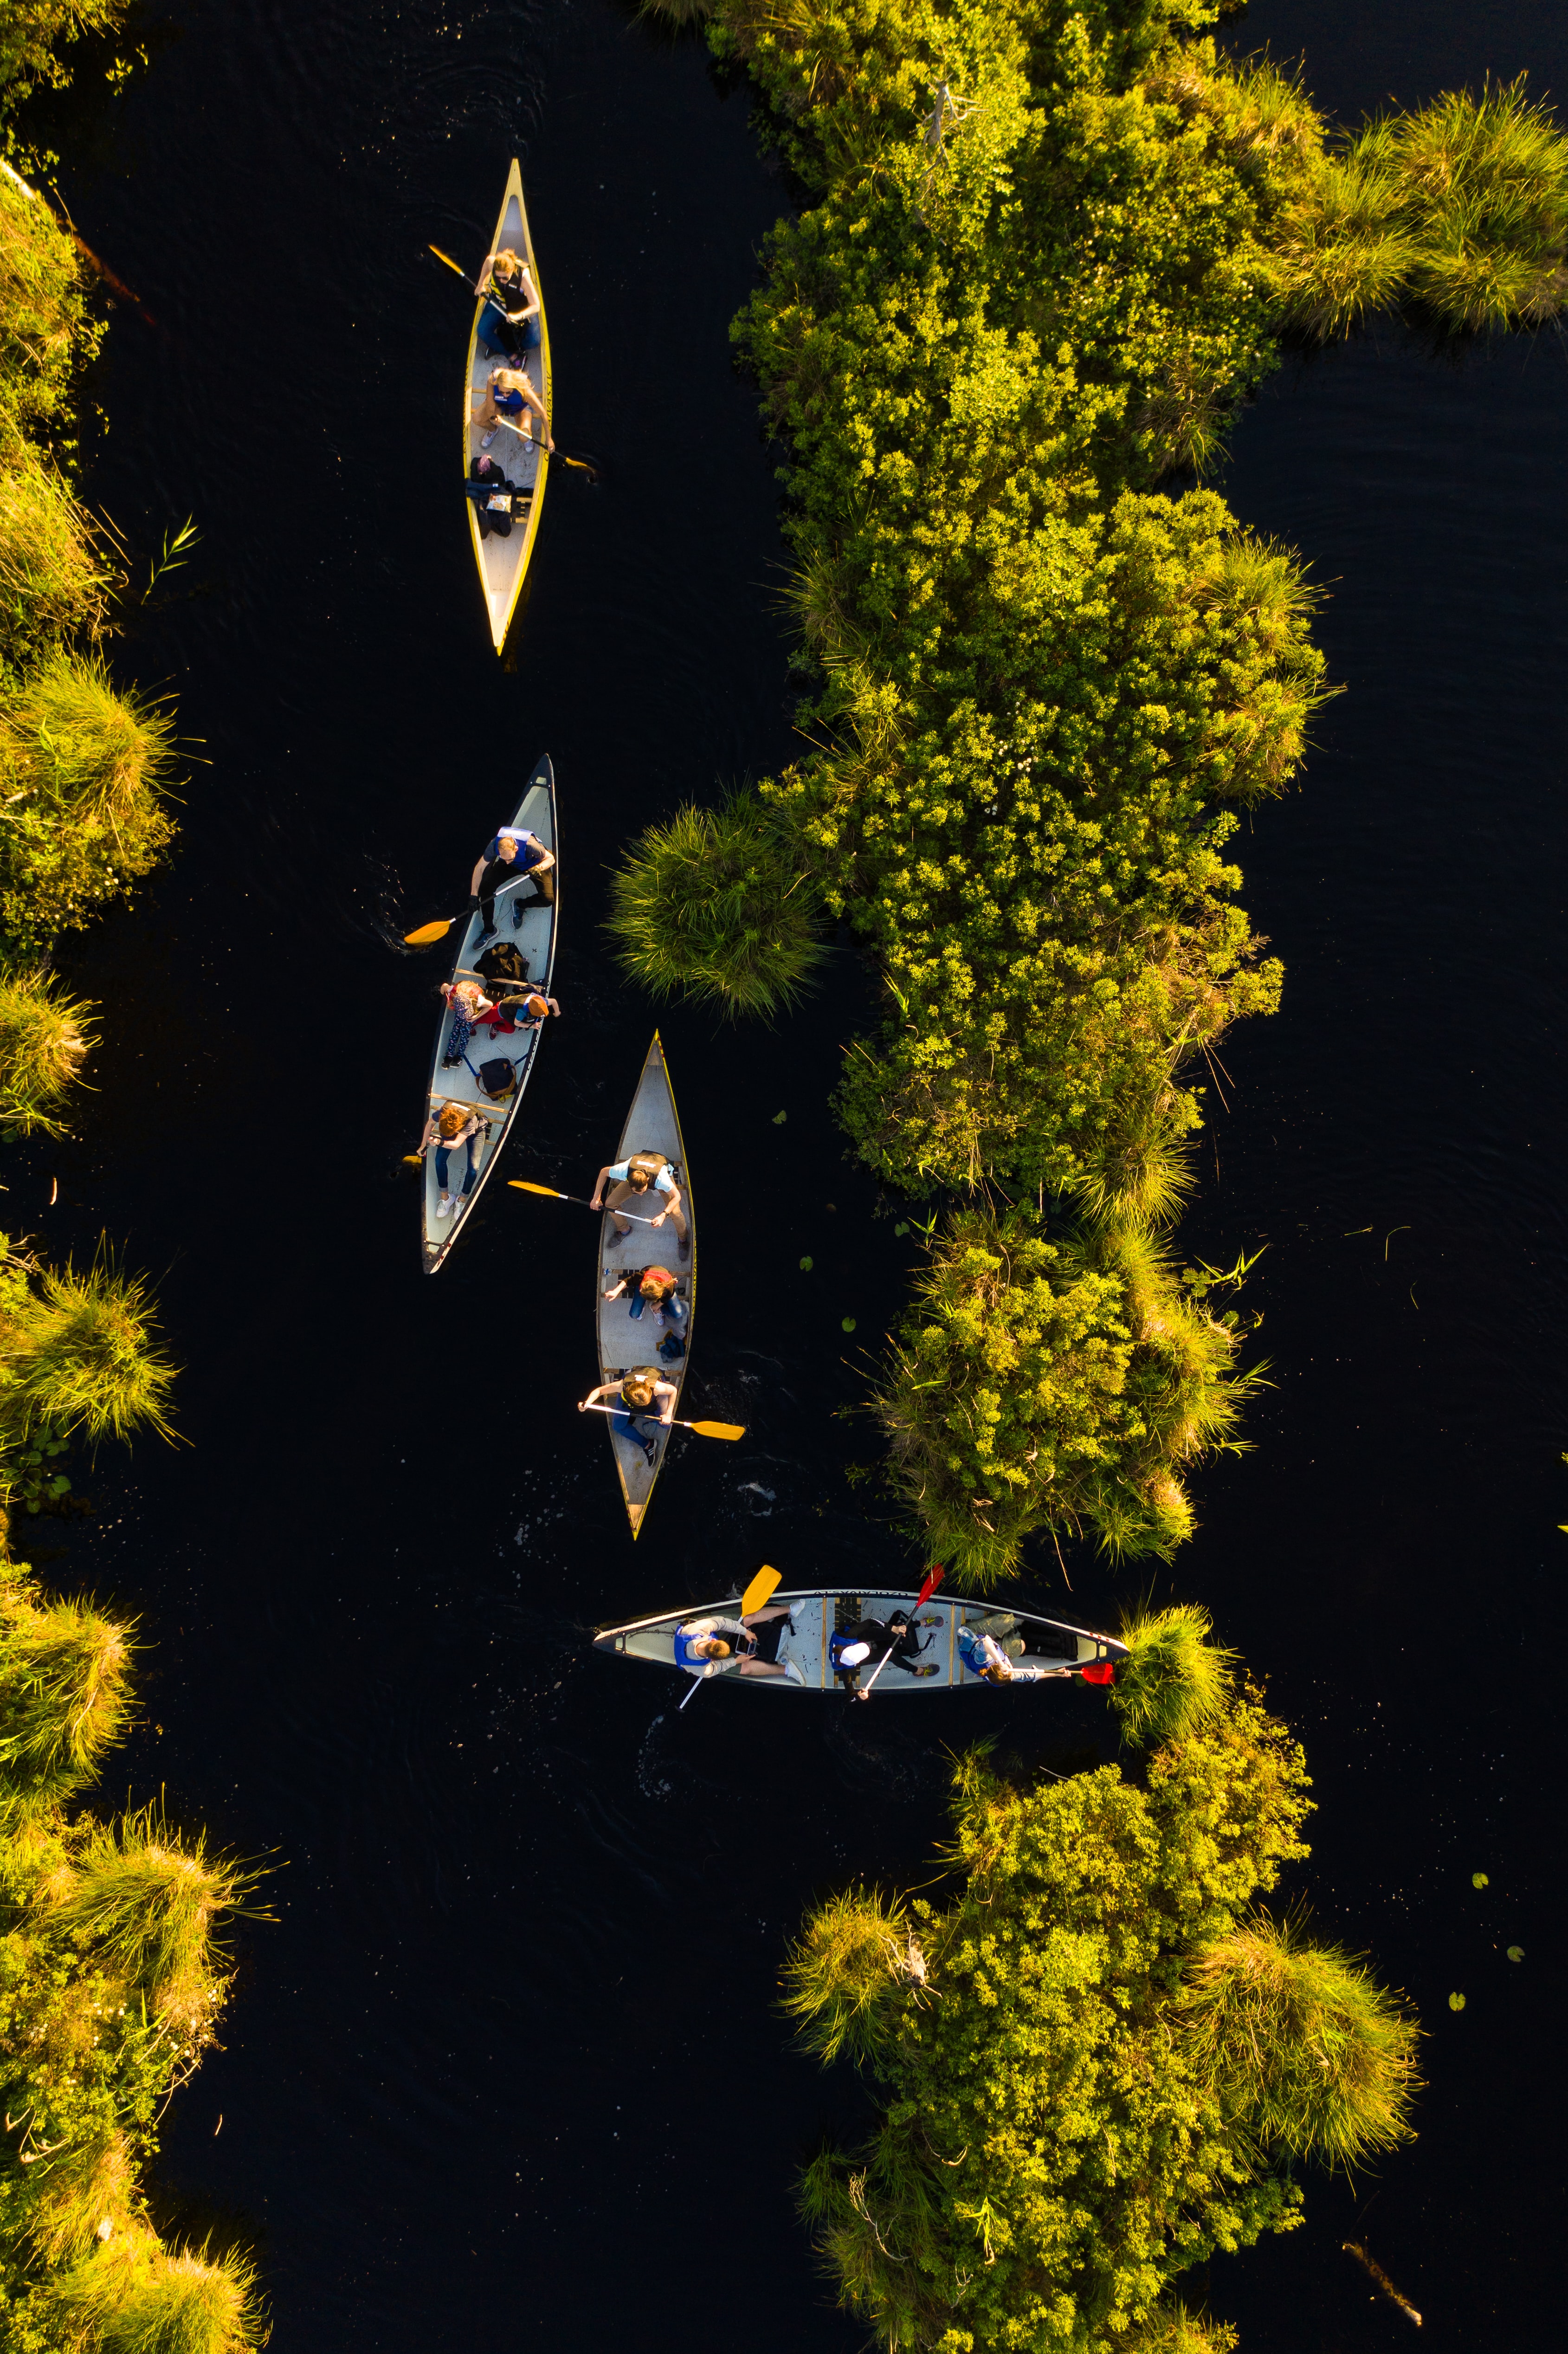 boats, sports, rivers, view from above, kayaks